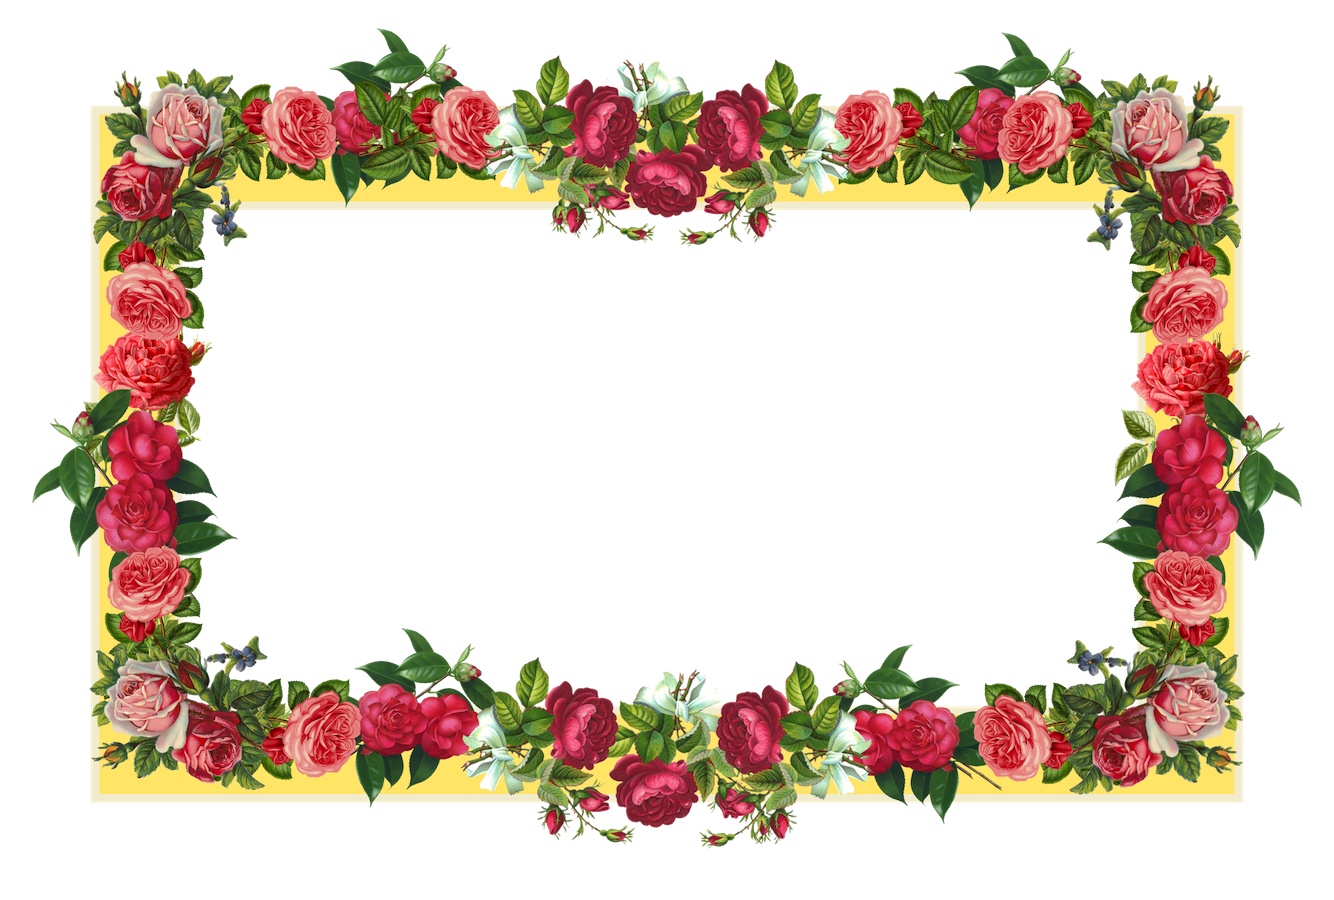 Flowers Frames And Borders - ClipArt Best